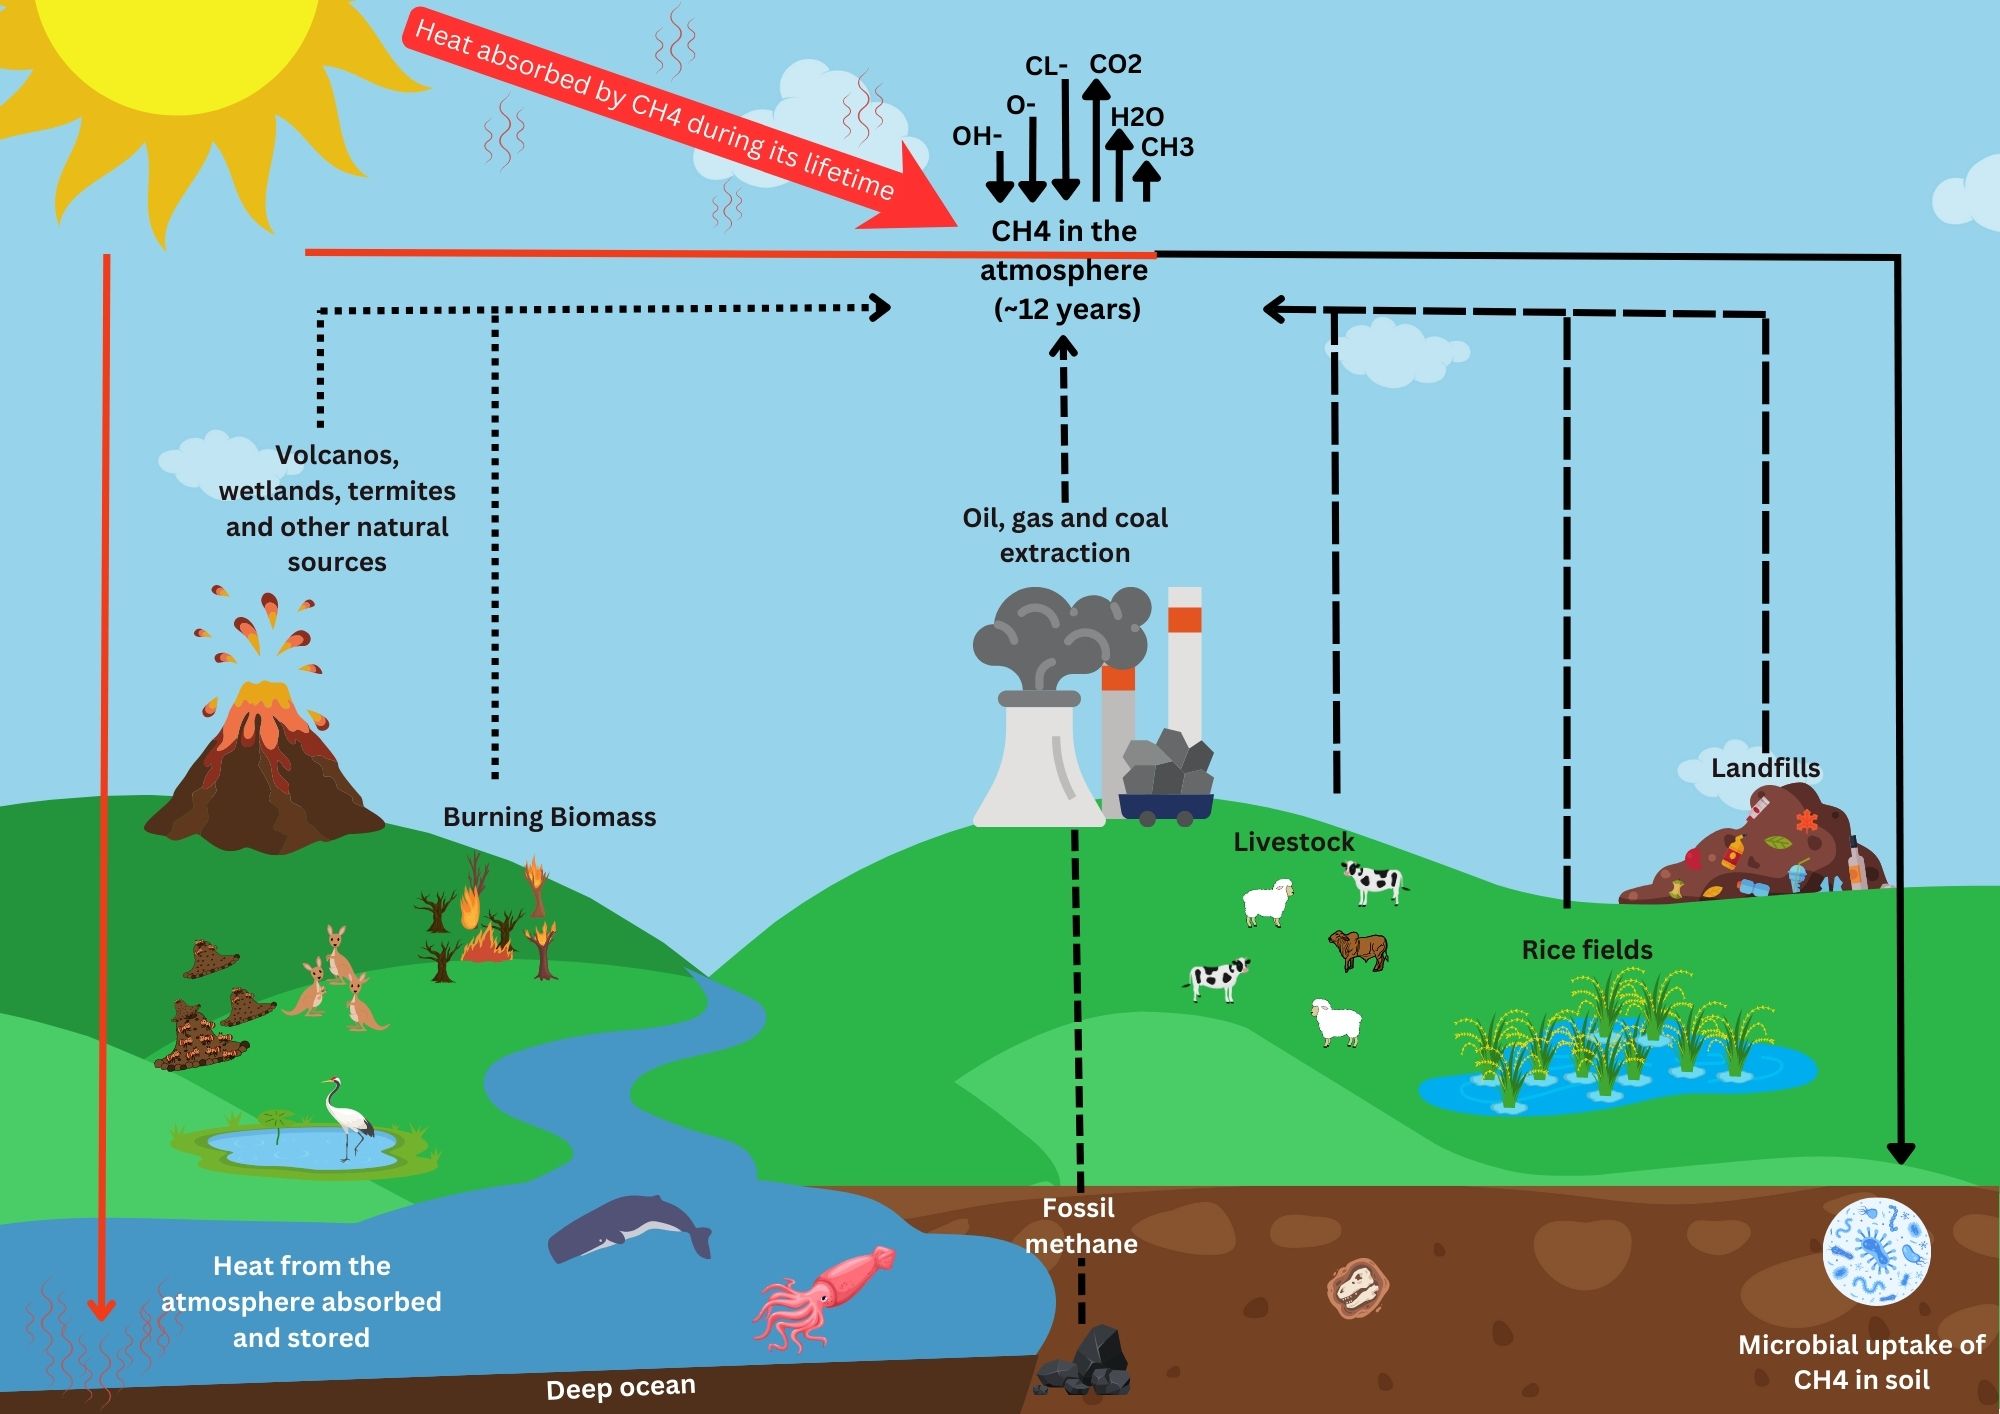 Diagram showing the life cycle of methane (CH4) from different sources